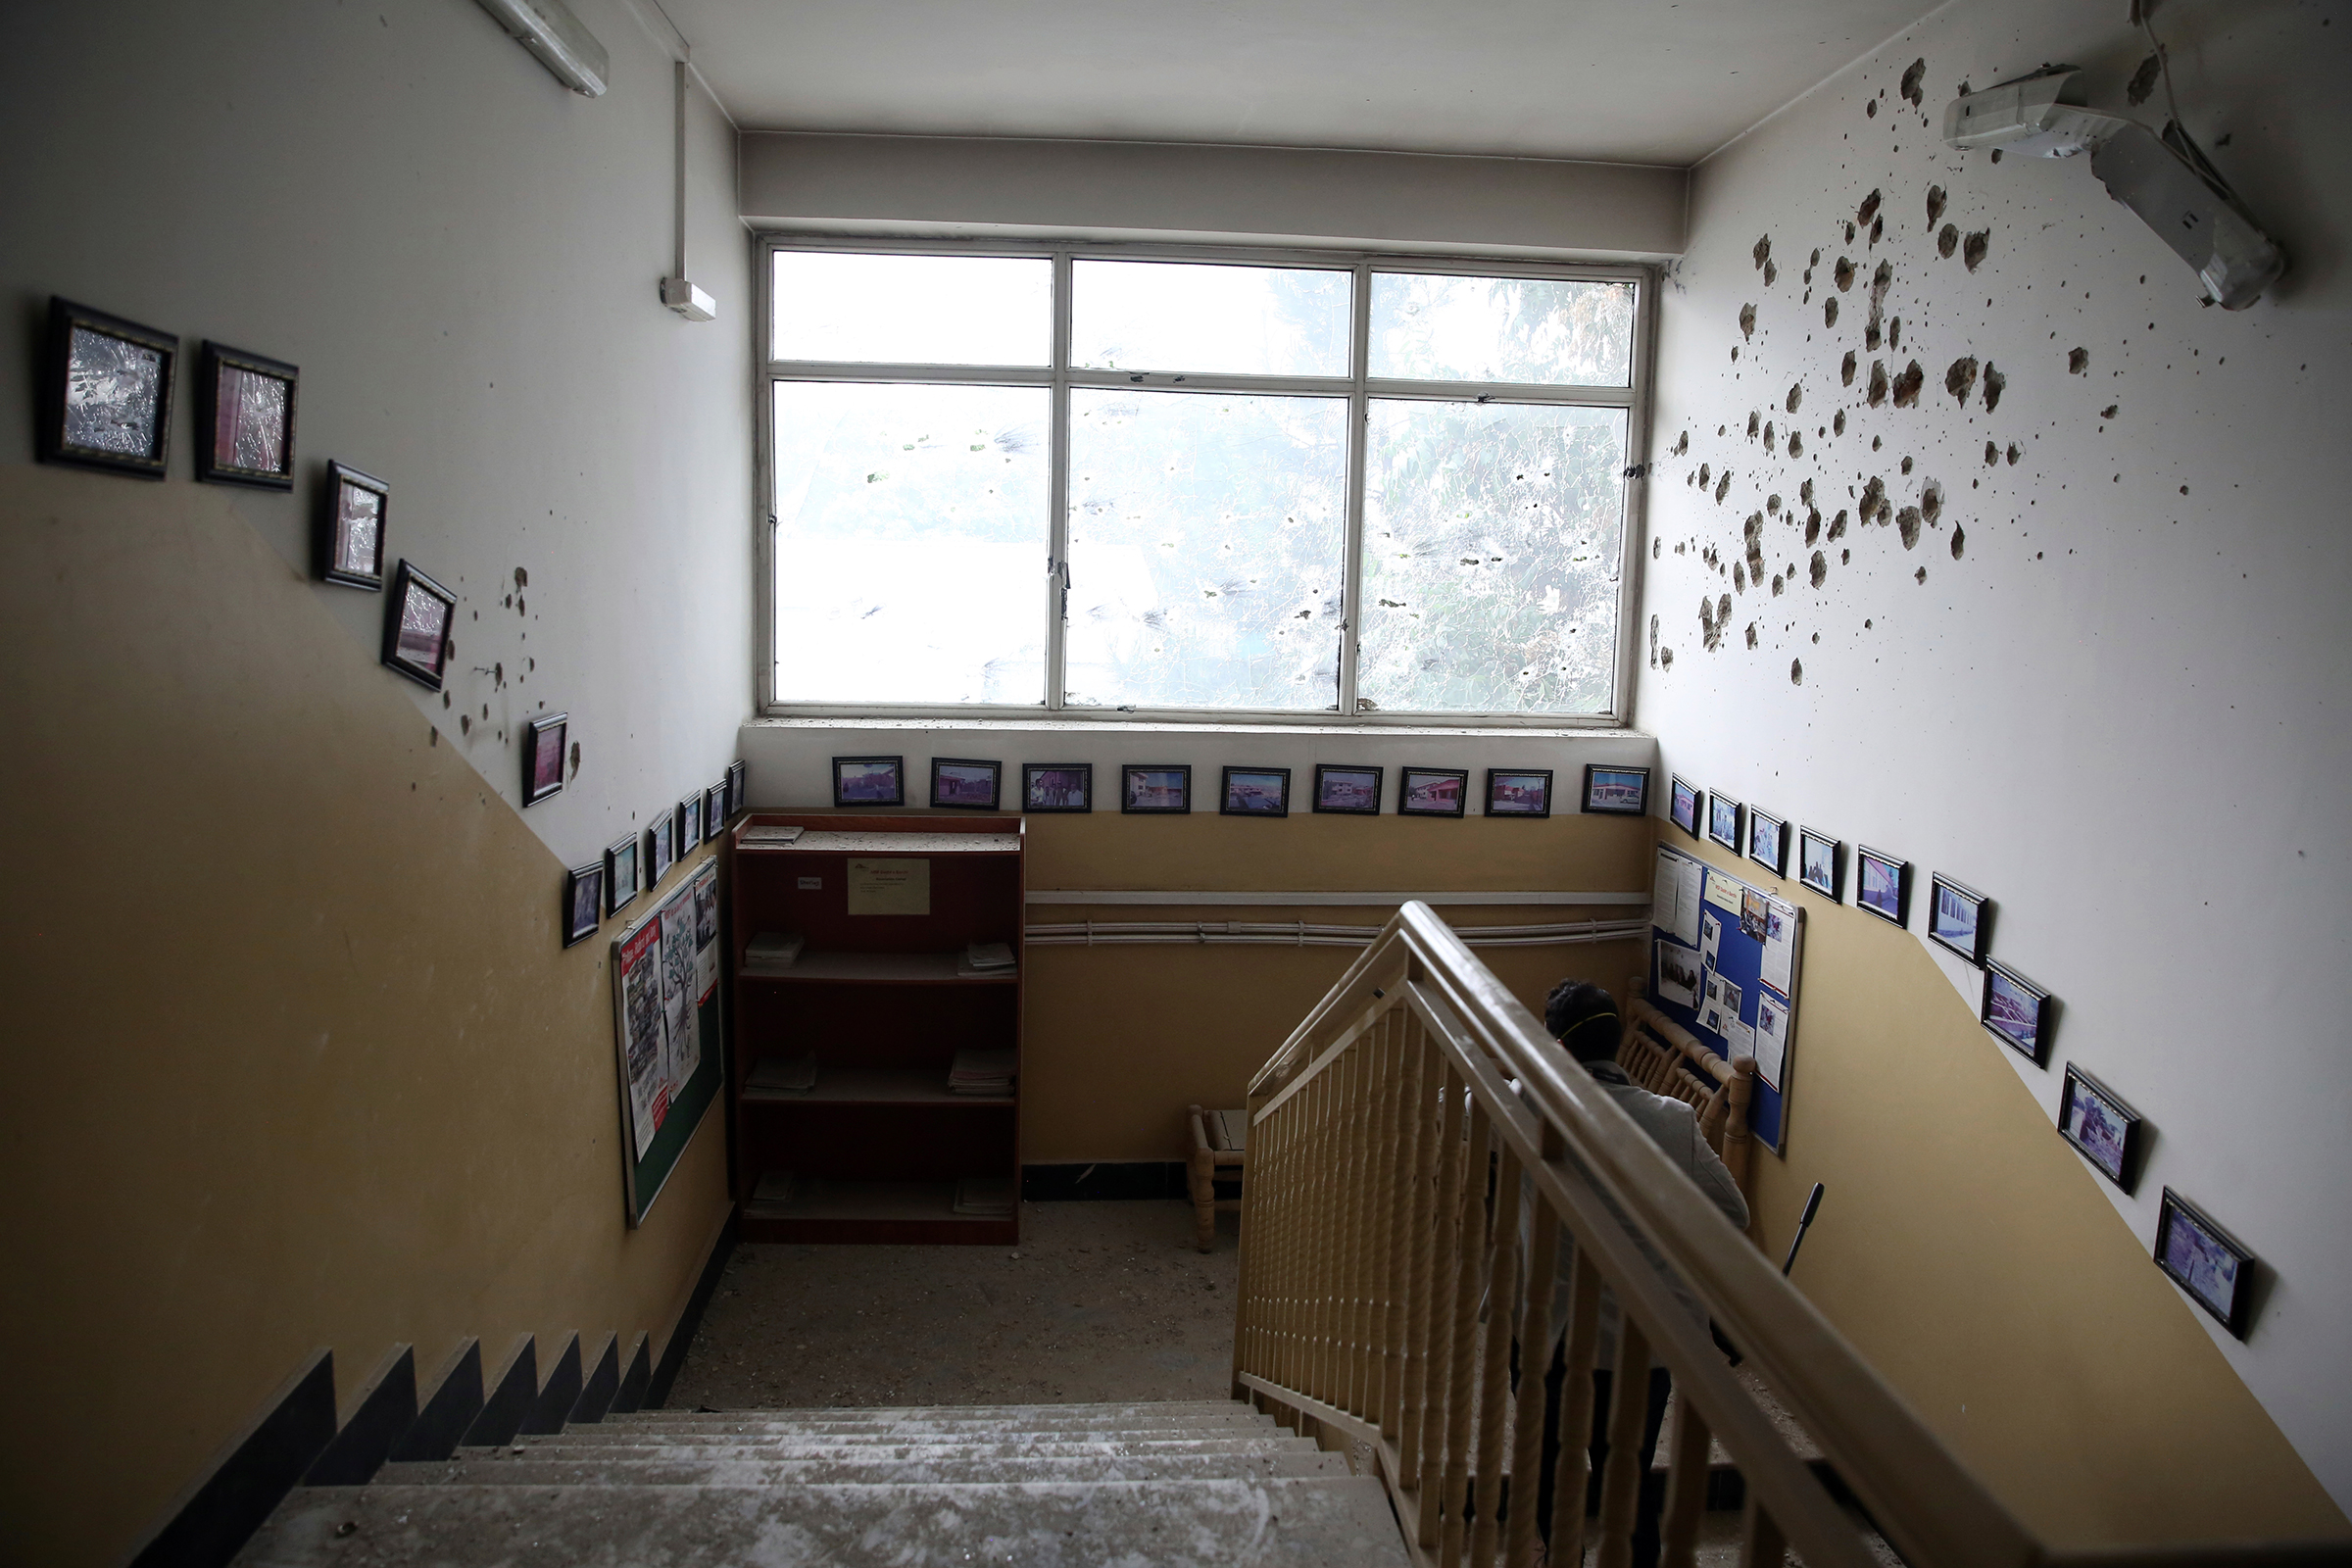 Bullet holes line the wall of the maternity hospital, after gunmen stormed the facility on May 12. (Rahmat Gul—AP)